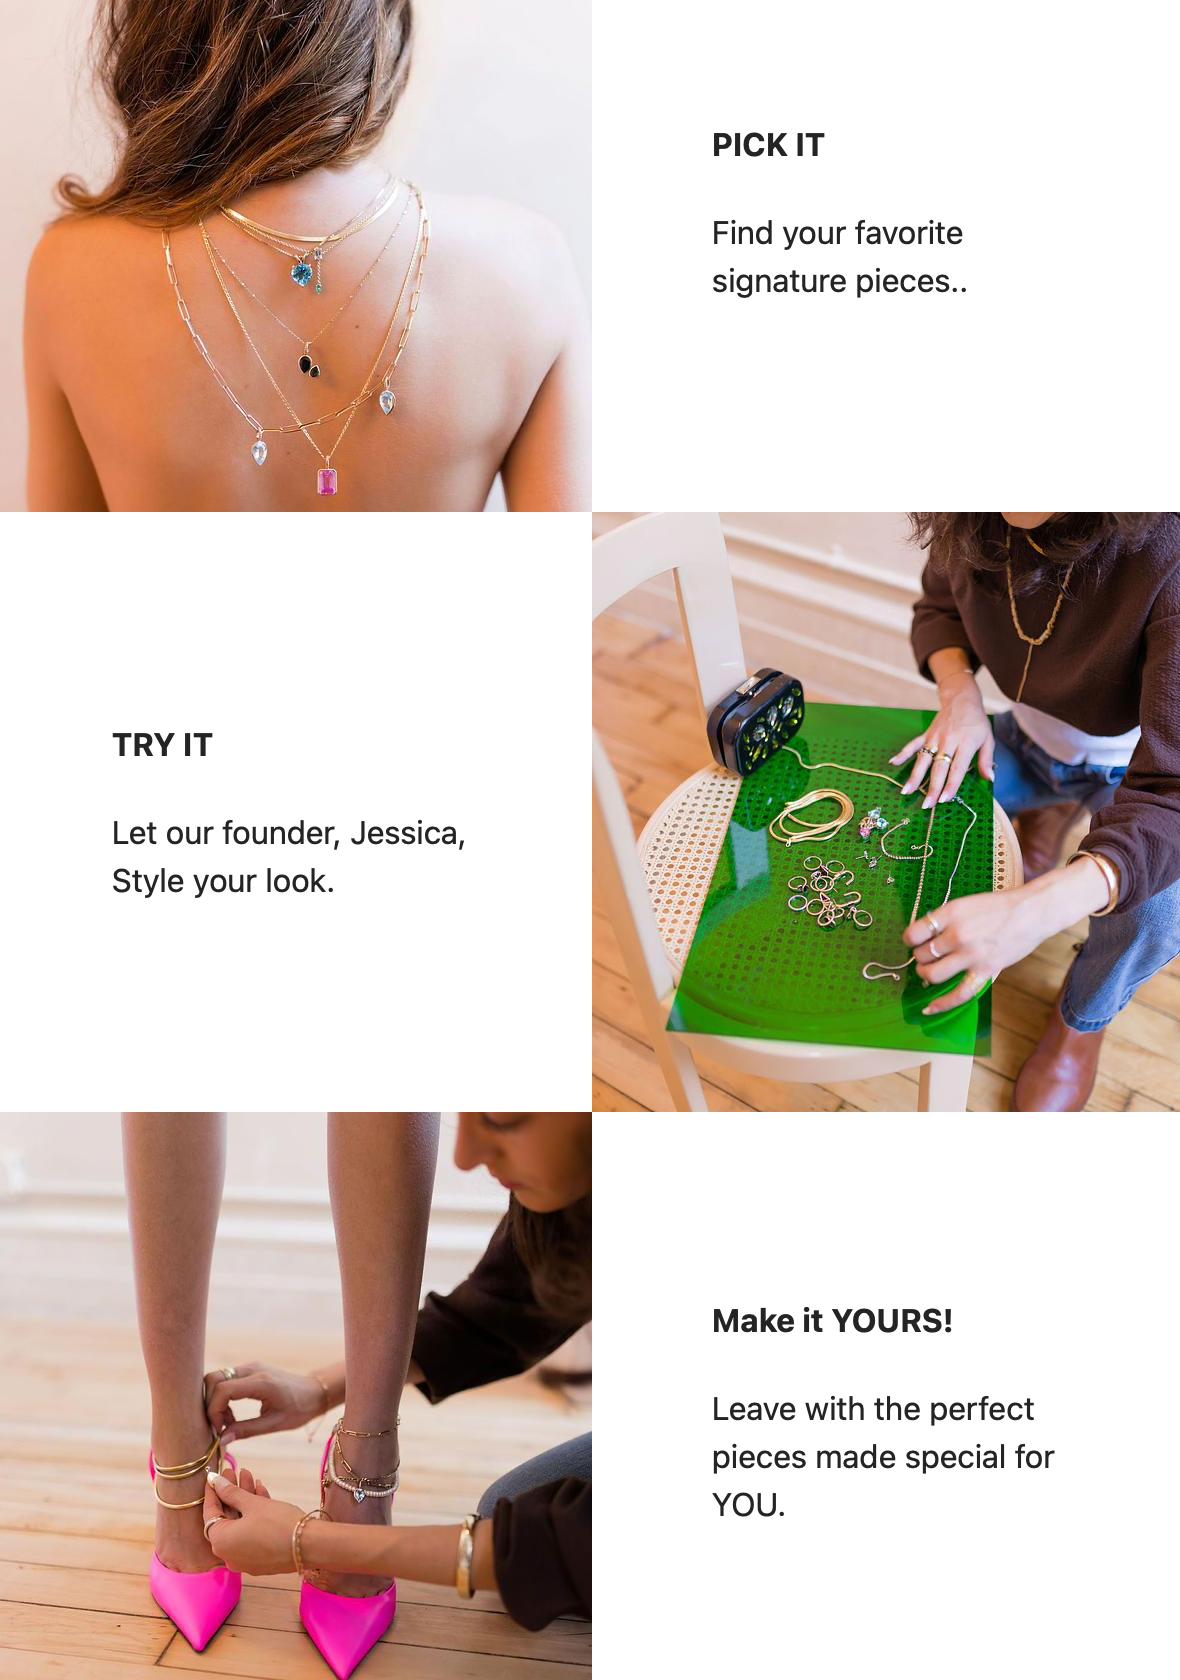 Styling Session directions to schedule a session with Founder Jessica Klein of Bondeye Jewelry